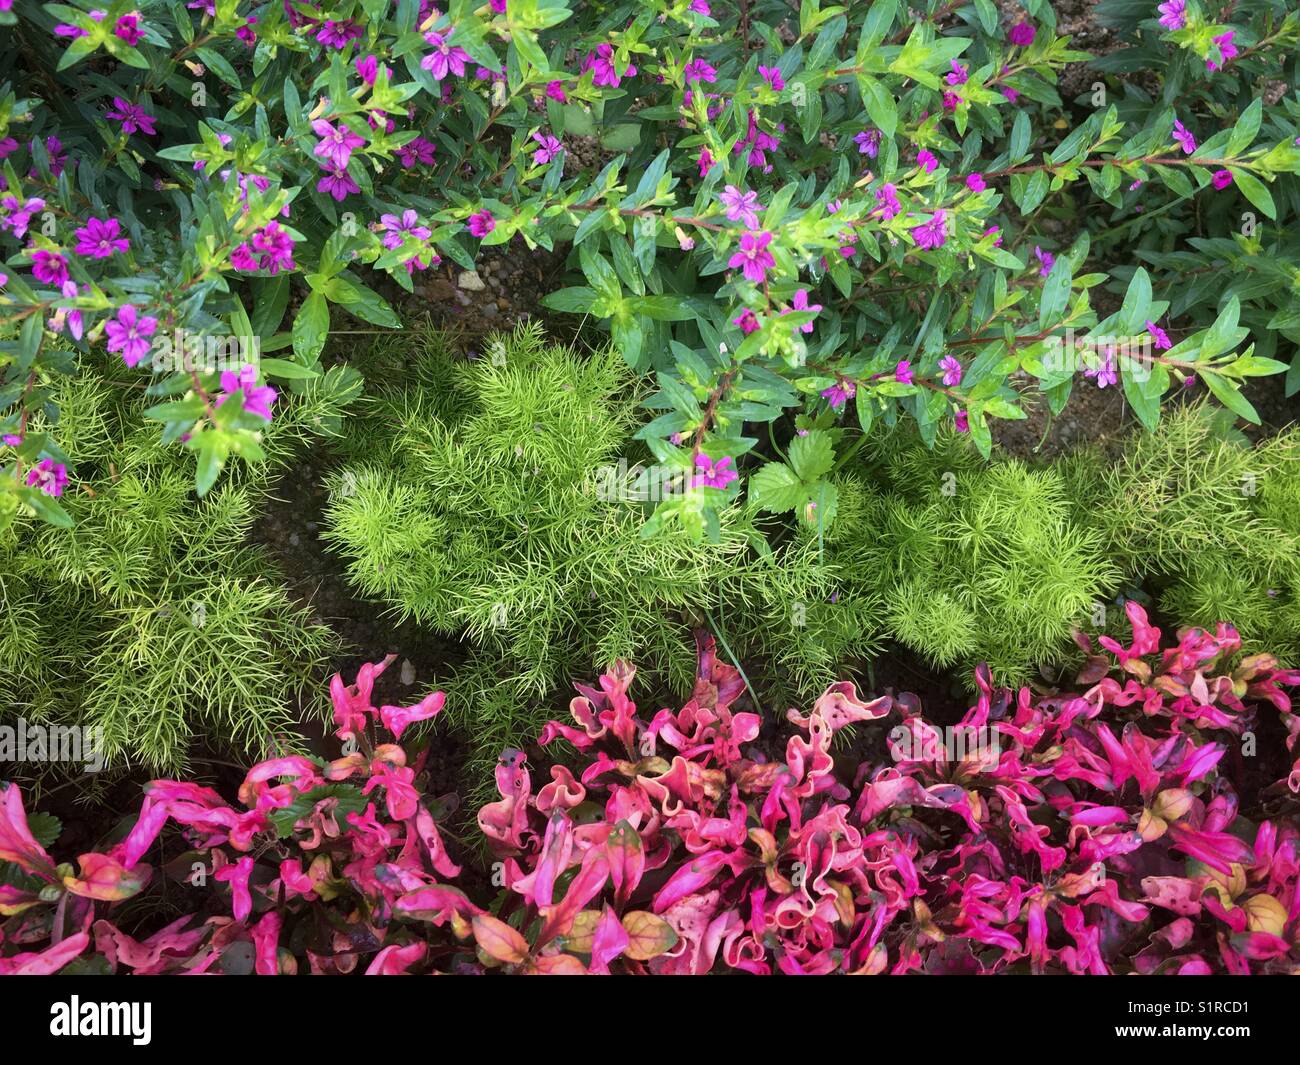 Colourful rows of pink and green flowering and leafy plants with water droplets after morning rain Stock Photo